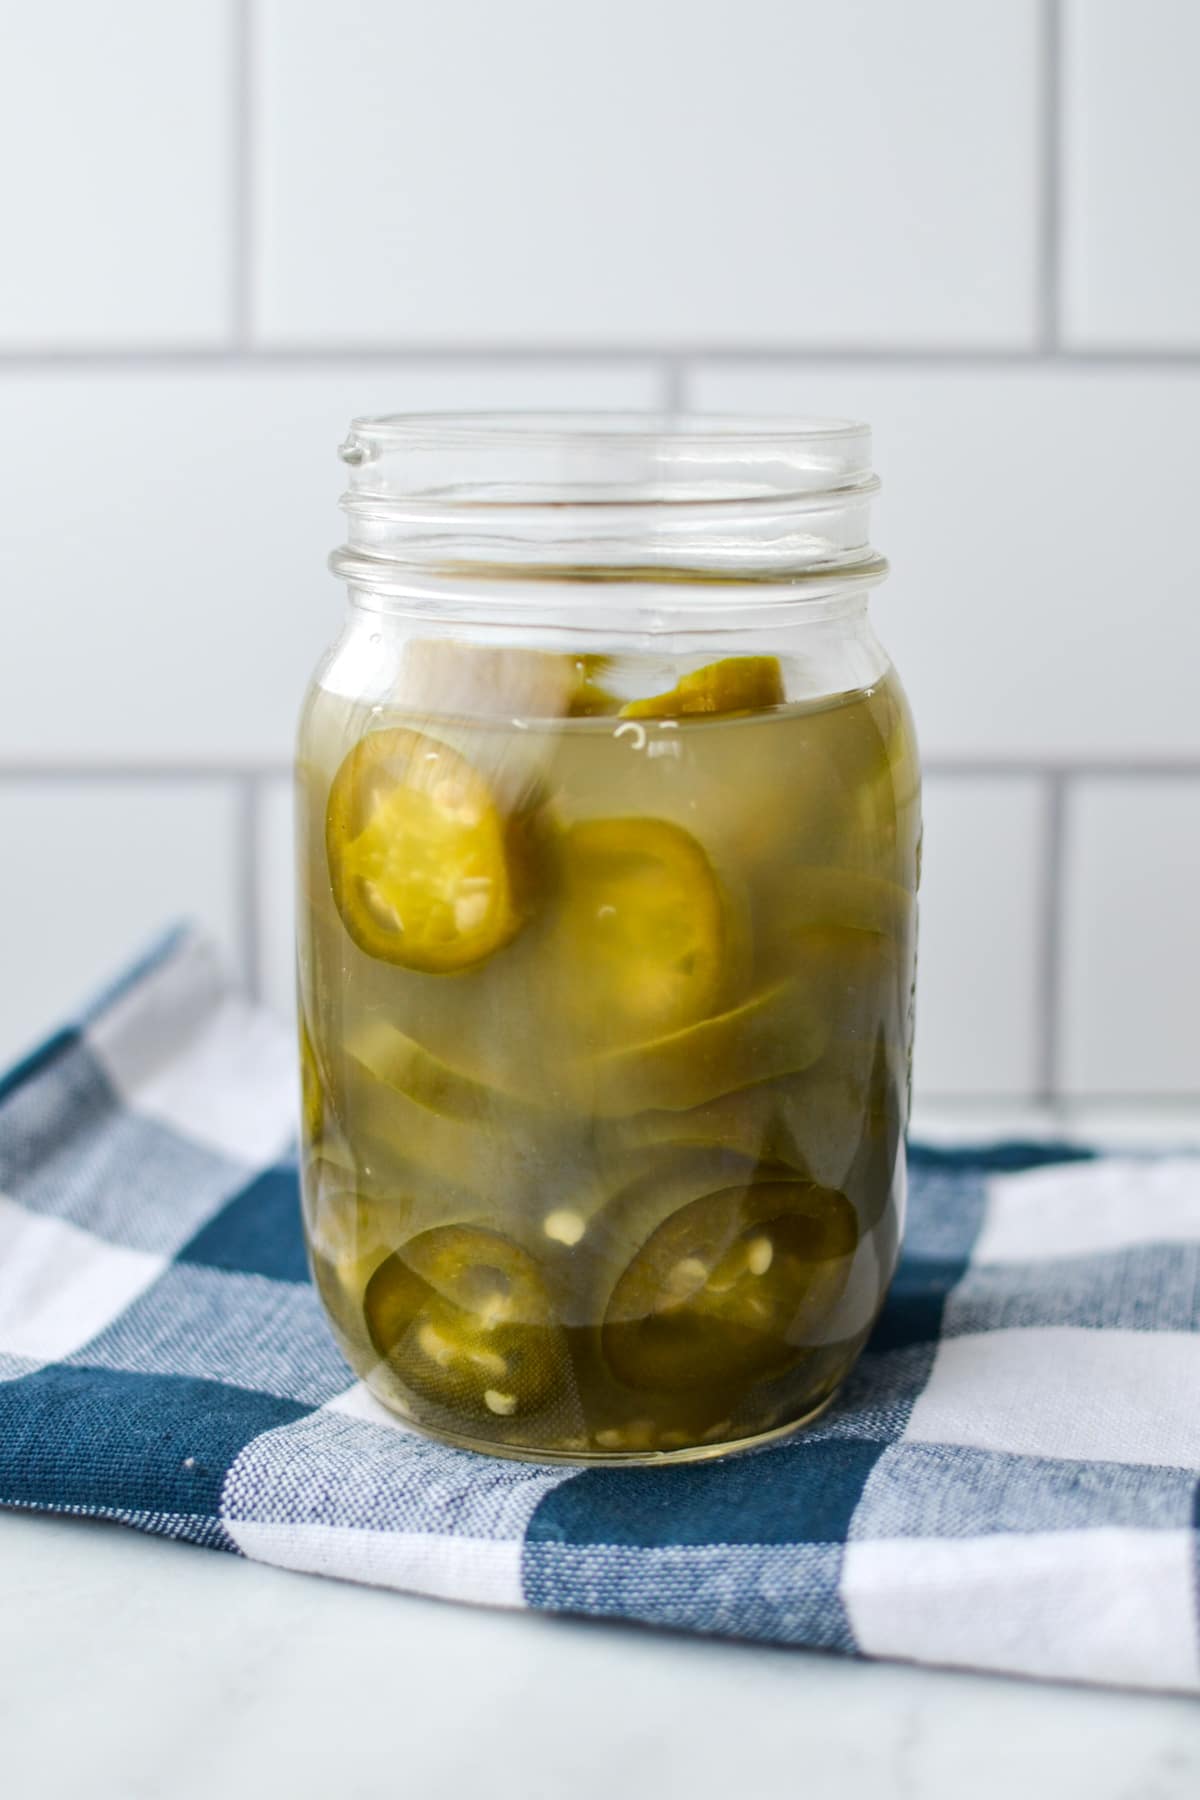 A jar of fully fermented jalapenos.